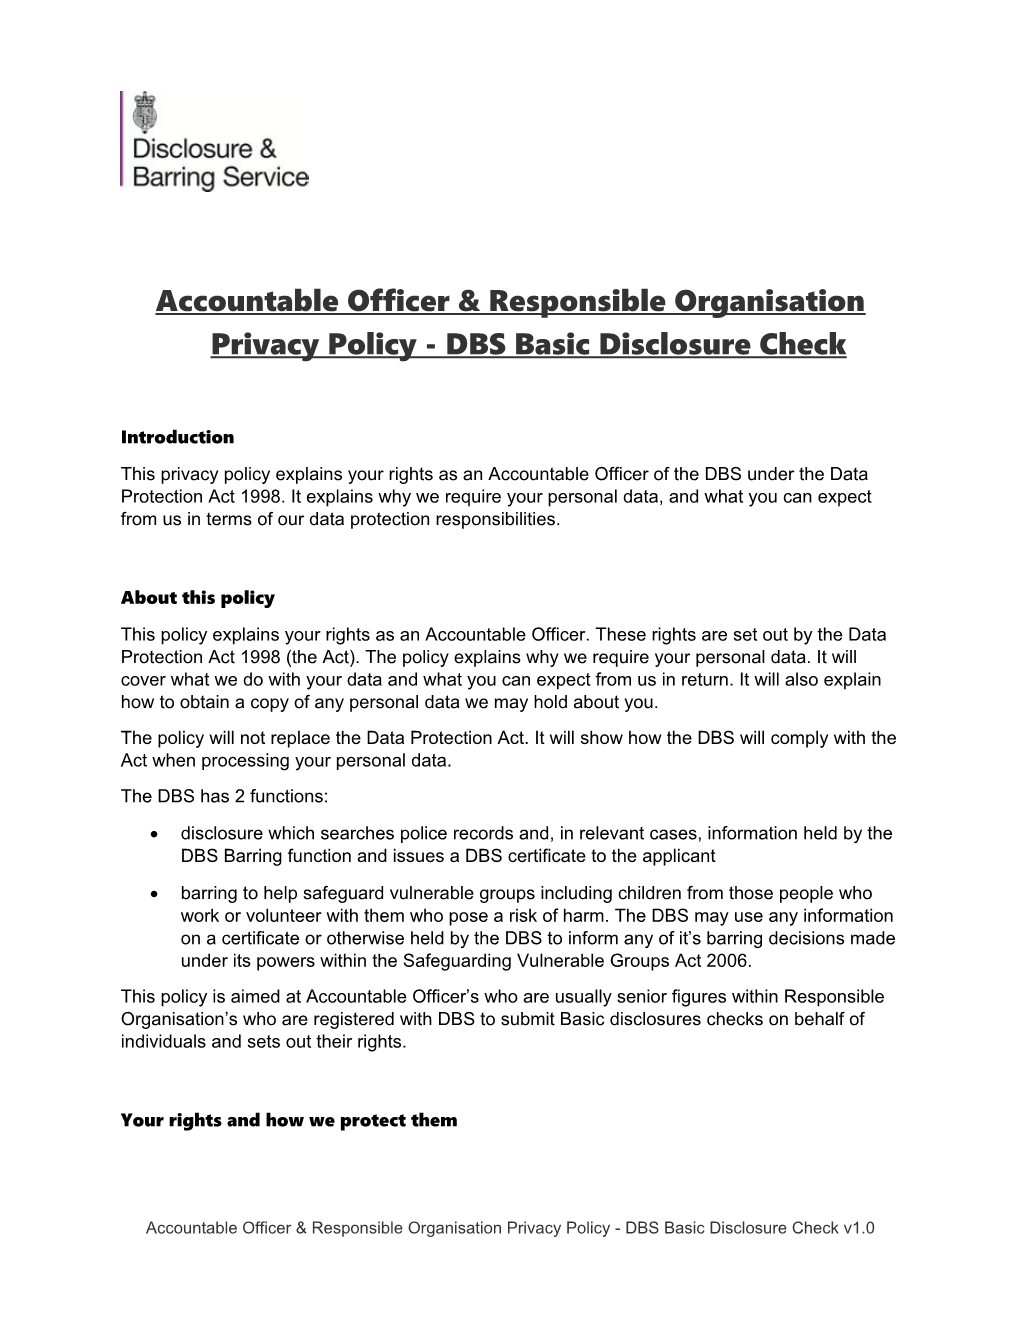 Accountable Officer & Responsible Organisation Privacy Policy - DBS Basic Disclosure Check